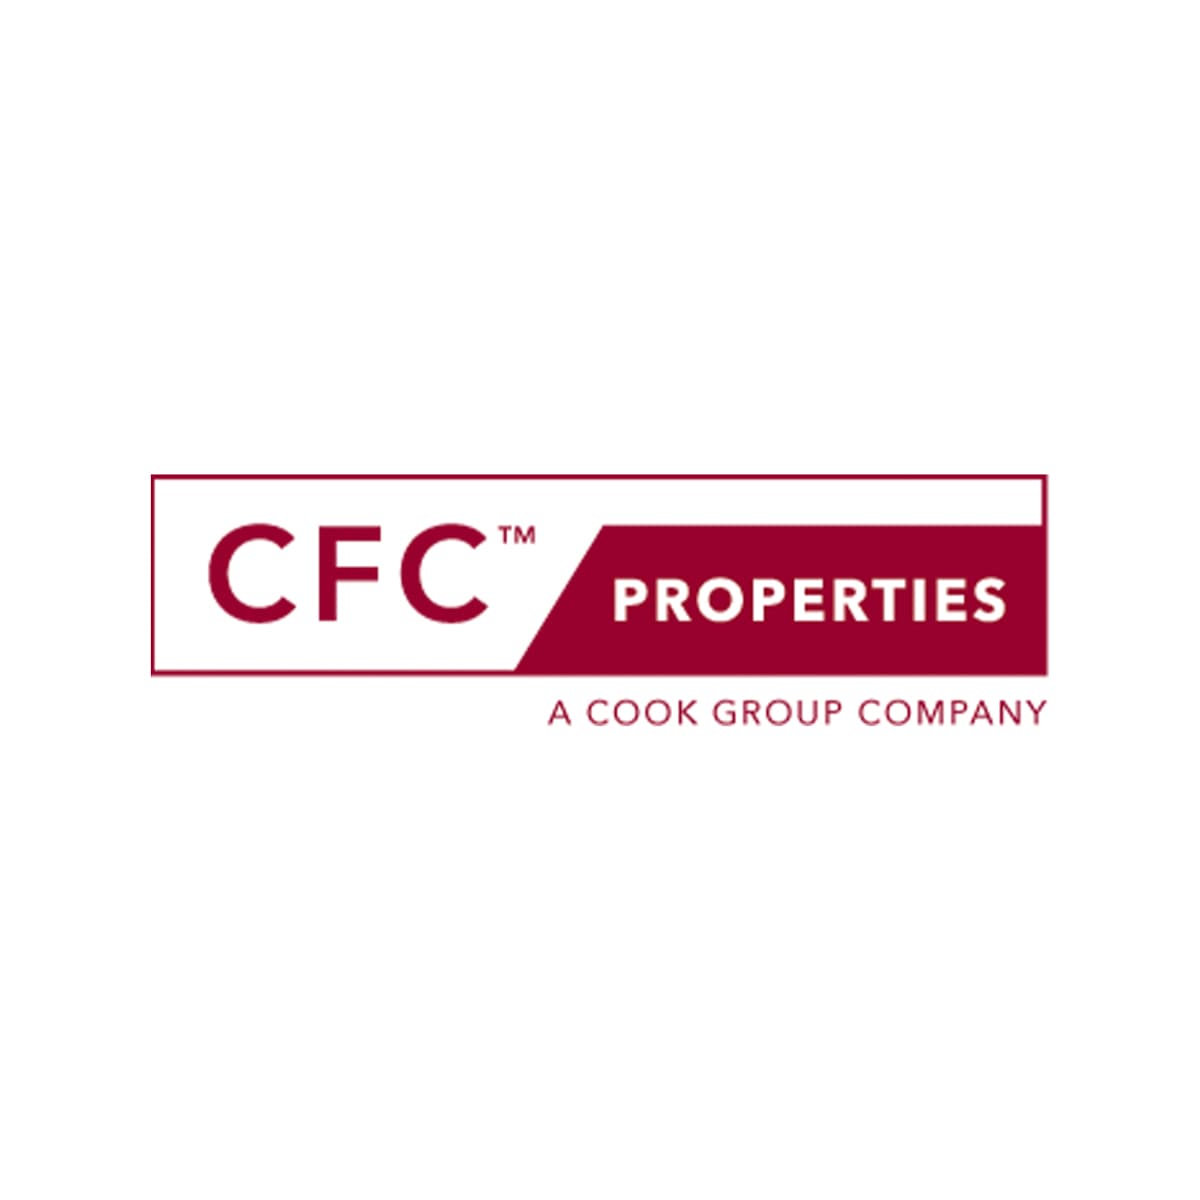 CFC Properties - A Cook Group Company